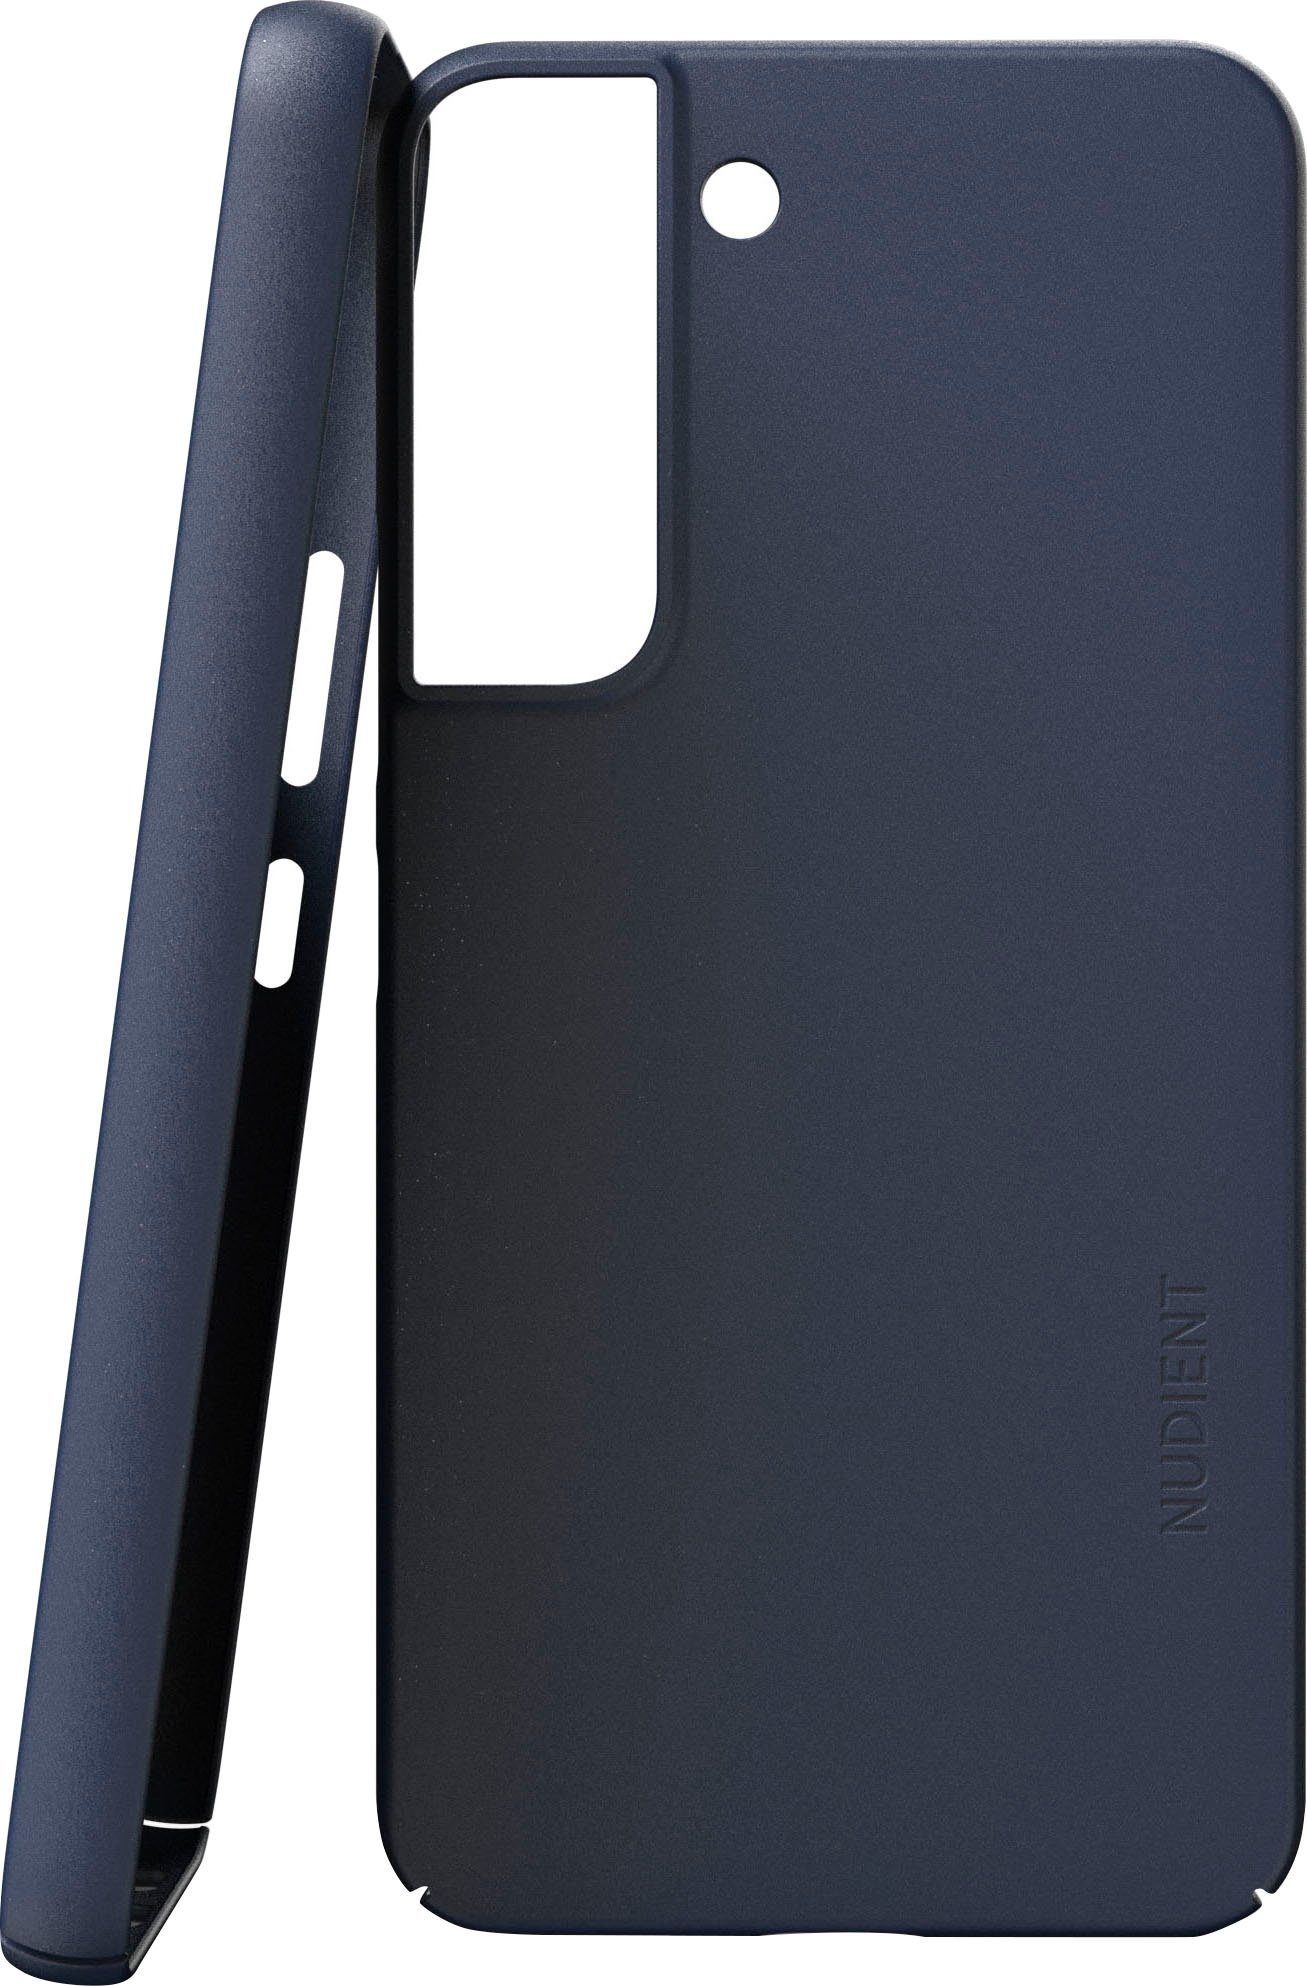 Nudient Smartphone-Hülle Thin Case 15,5 cm (6,1 Zoll)